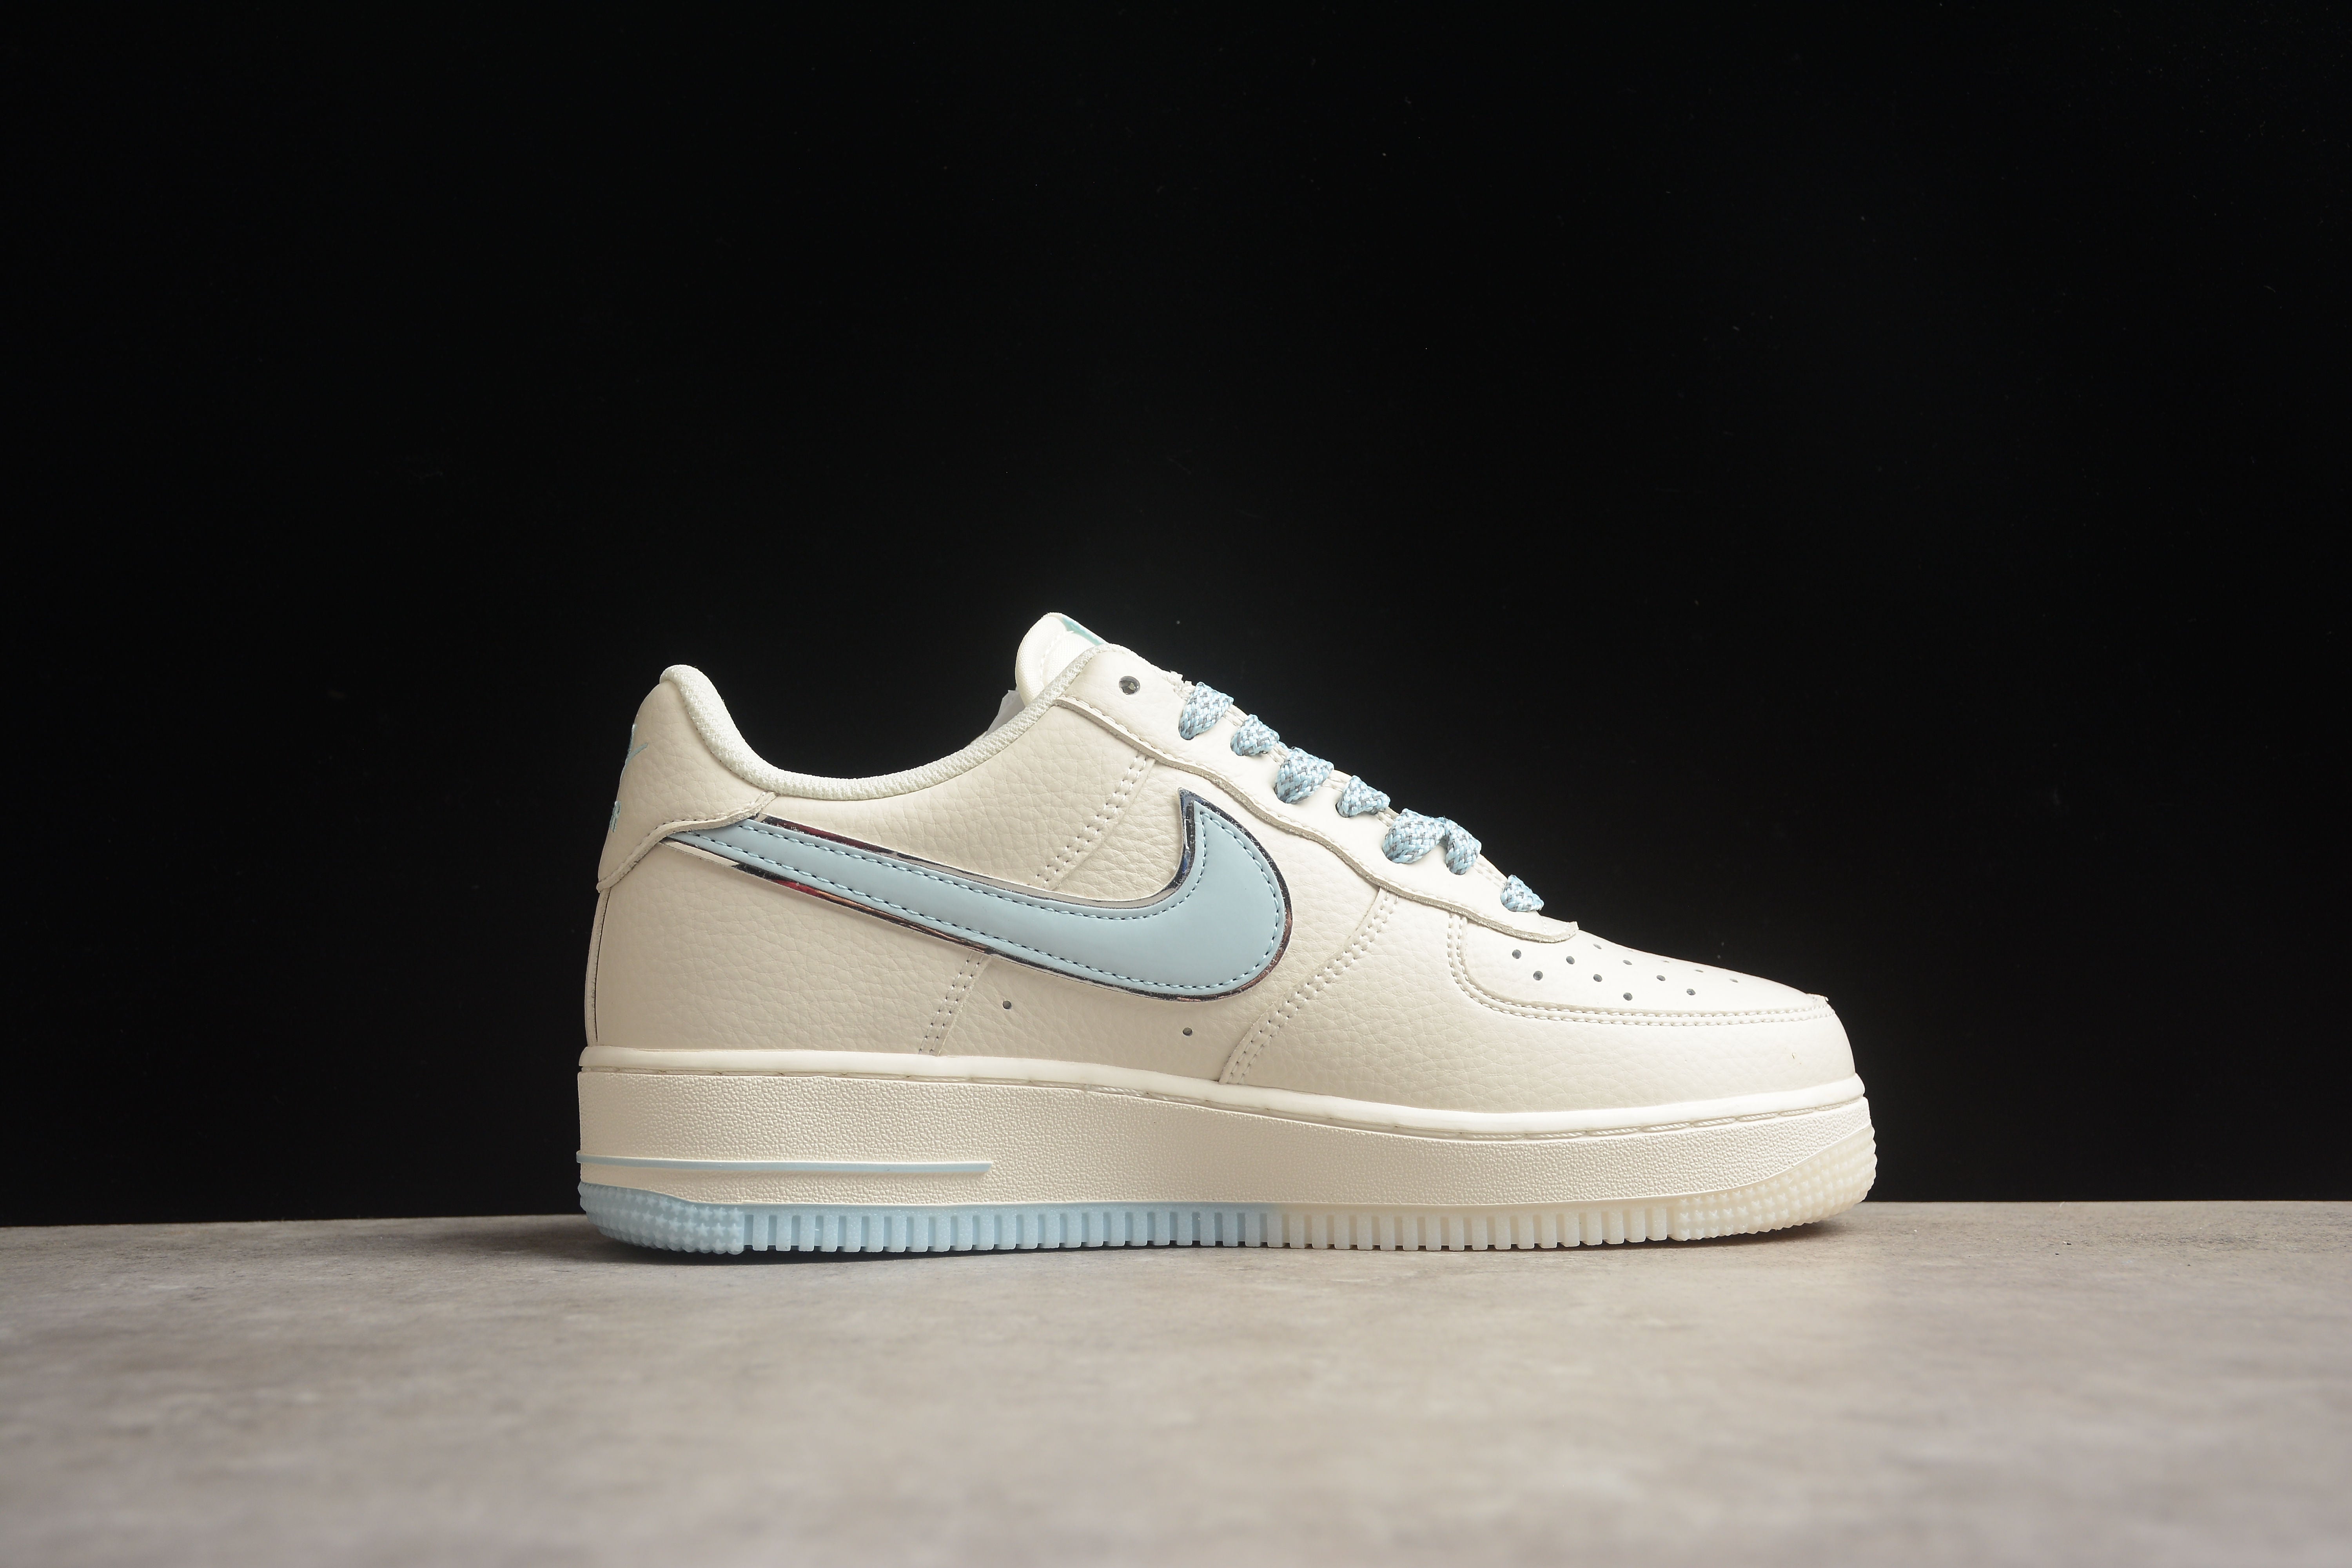 Nike airforce A1 blue ombre shoes